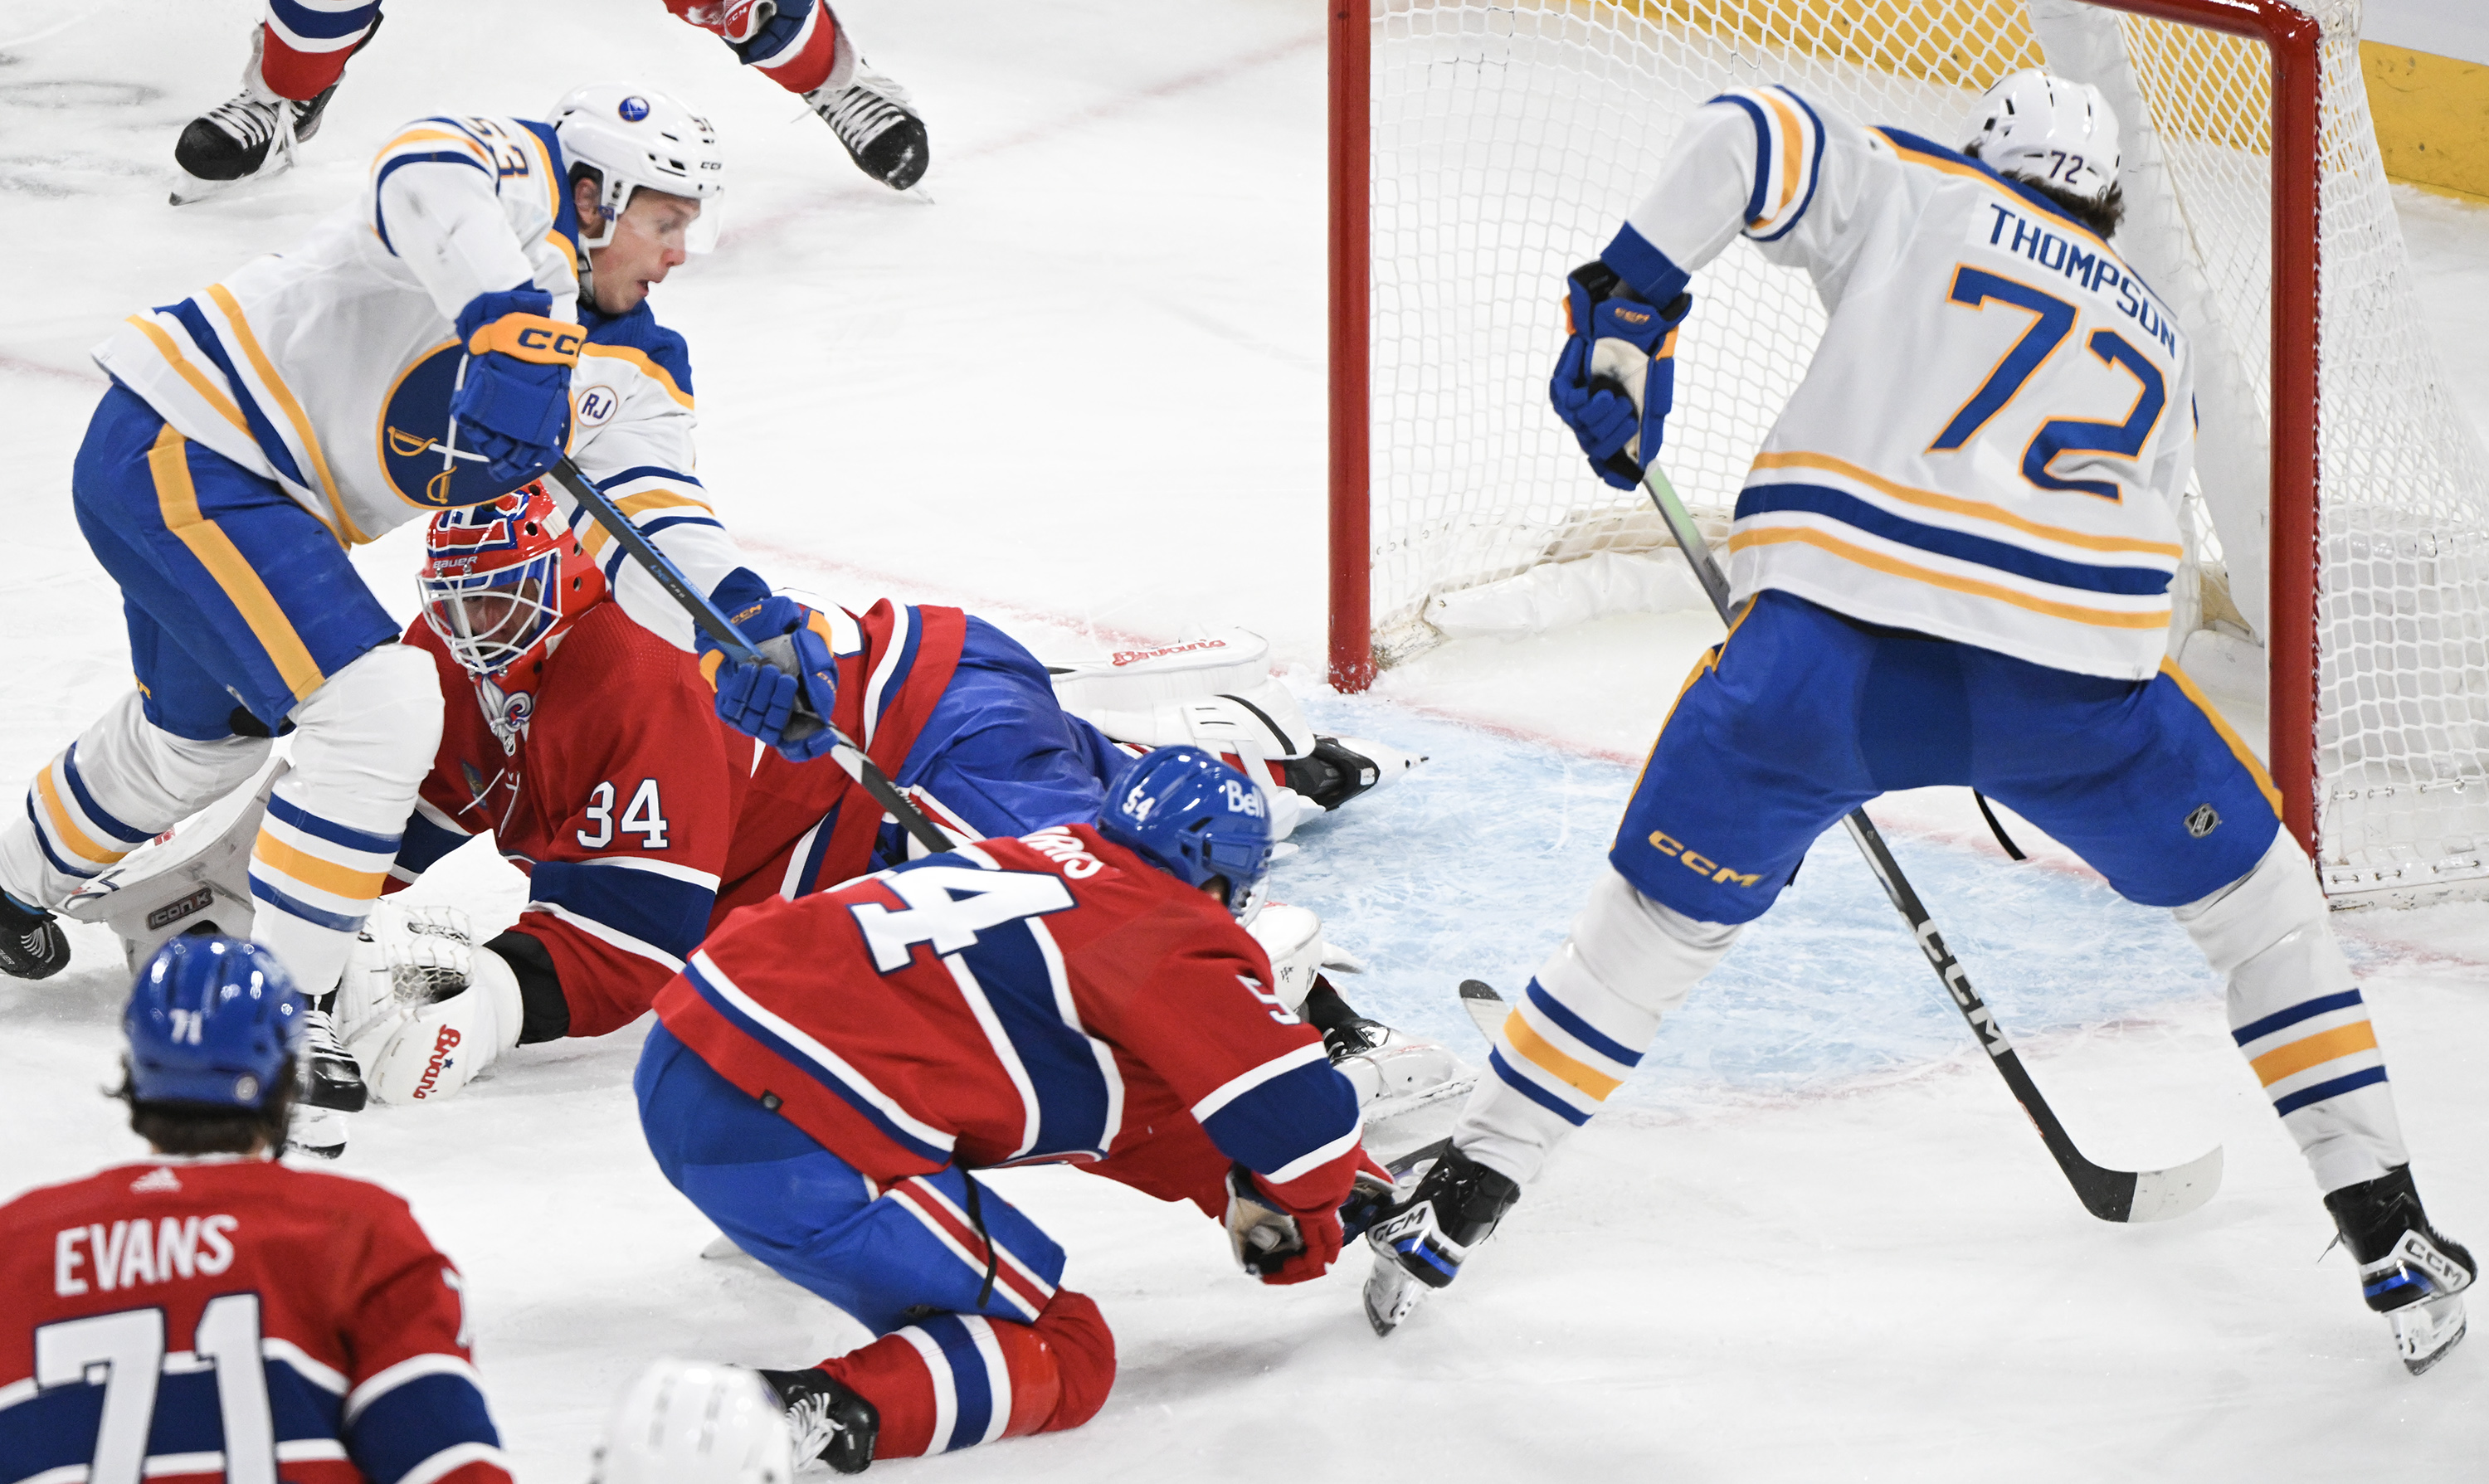 Call of the Wilde: Montreal Canadiens easily handled as Buffalo Sabres coast to 6-1 win